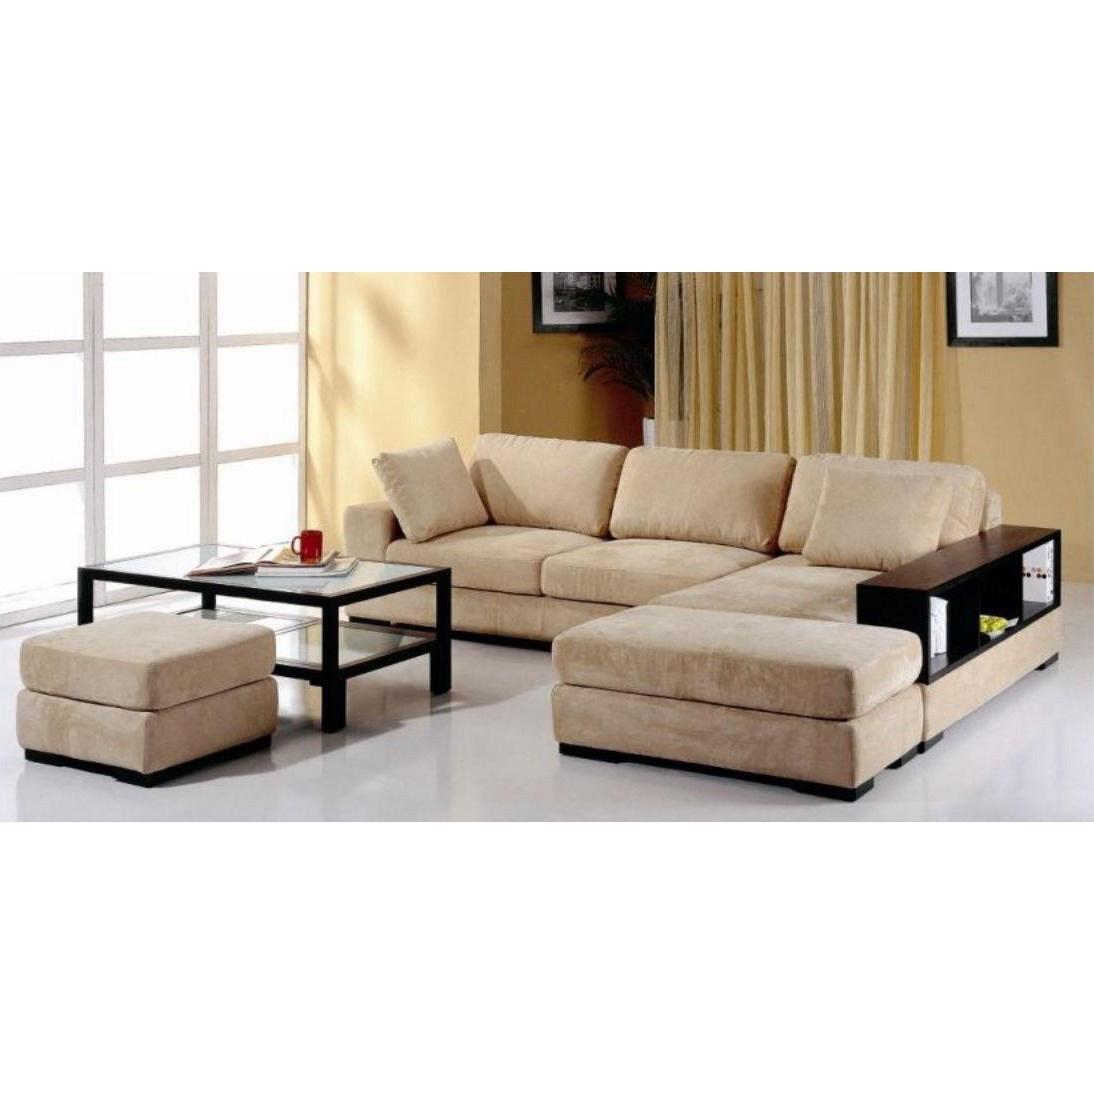 Modern Sectional Sofa Telus BH-TELUS-BEI-RIGHT in Beige Fabric